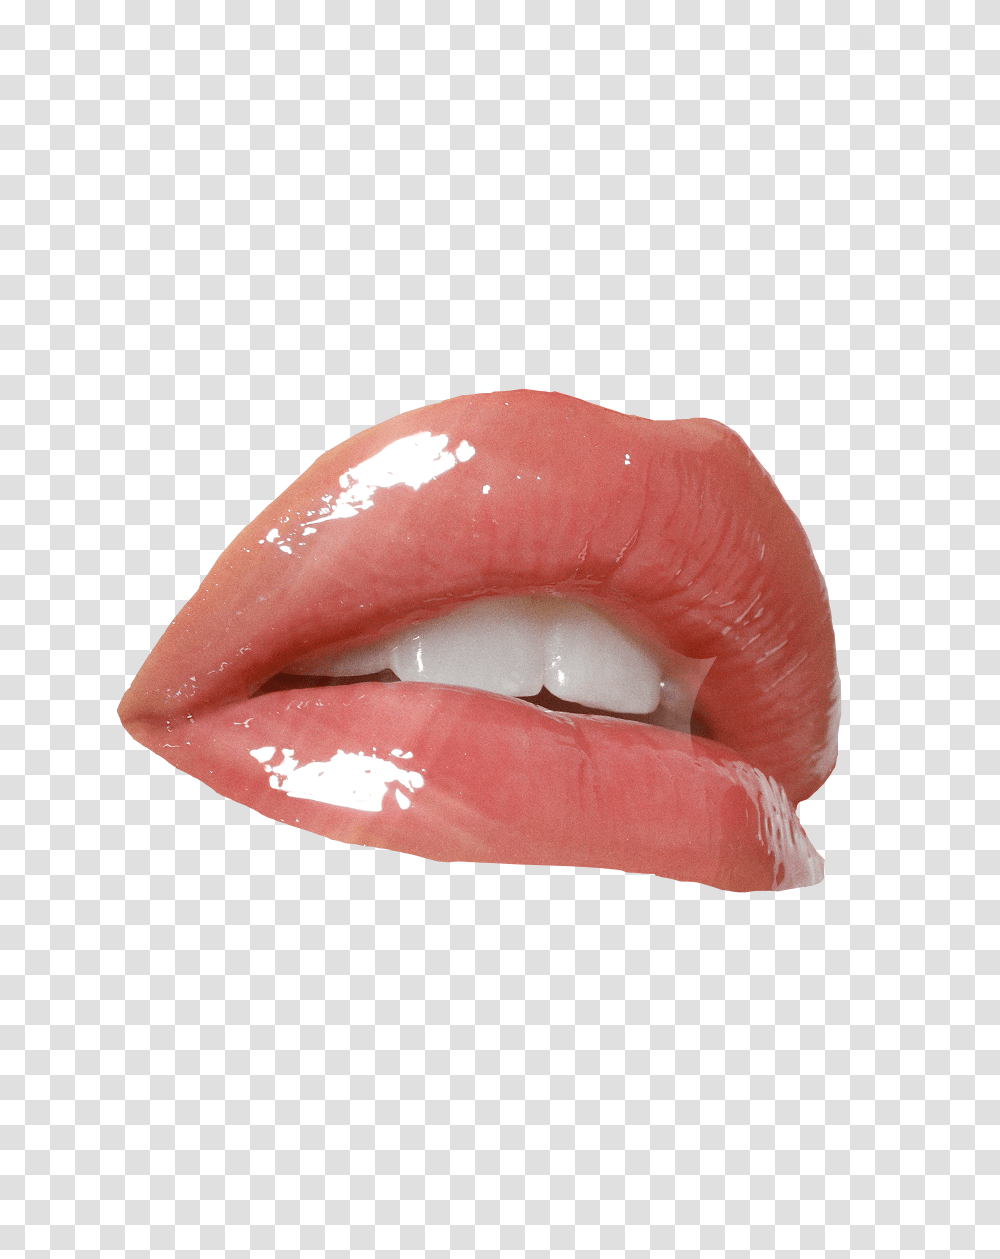 Glossylips Glossy Glossier Glossybox Gloss Lips Super Glossy Glossy Lips, Mouth, Teeth Transparent Png